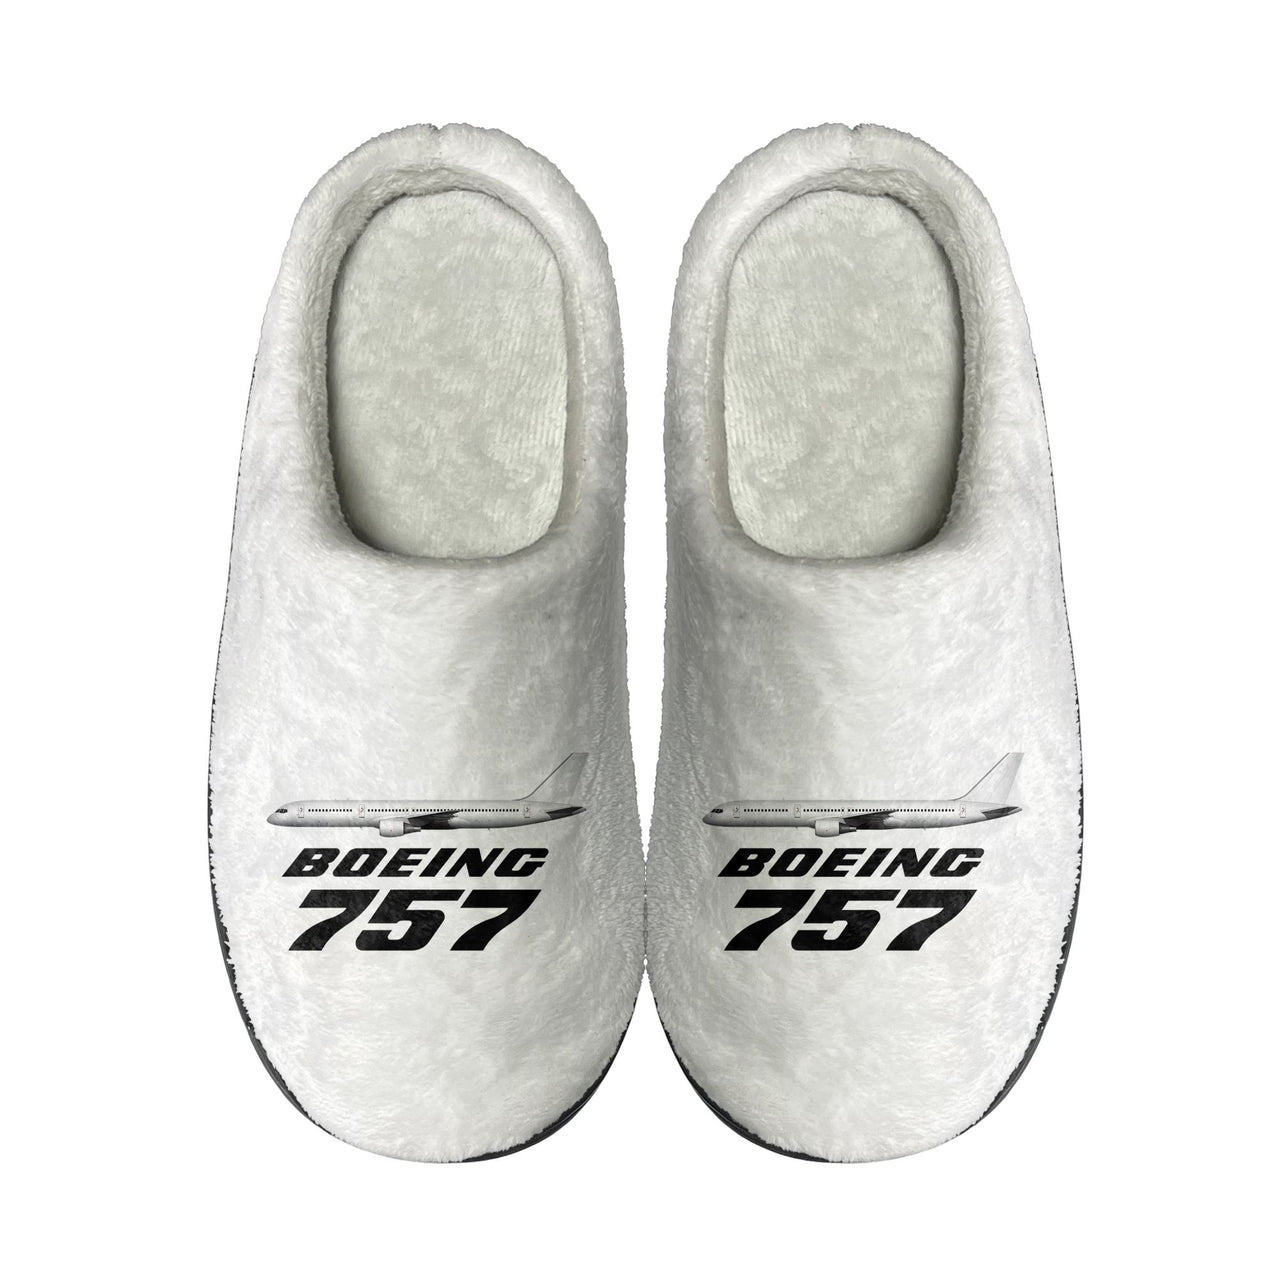 The Boeing 757 Designed Cotton Slippers